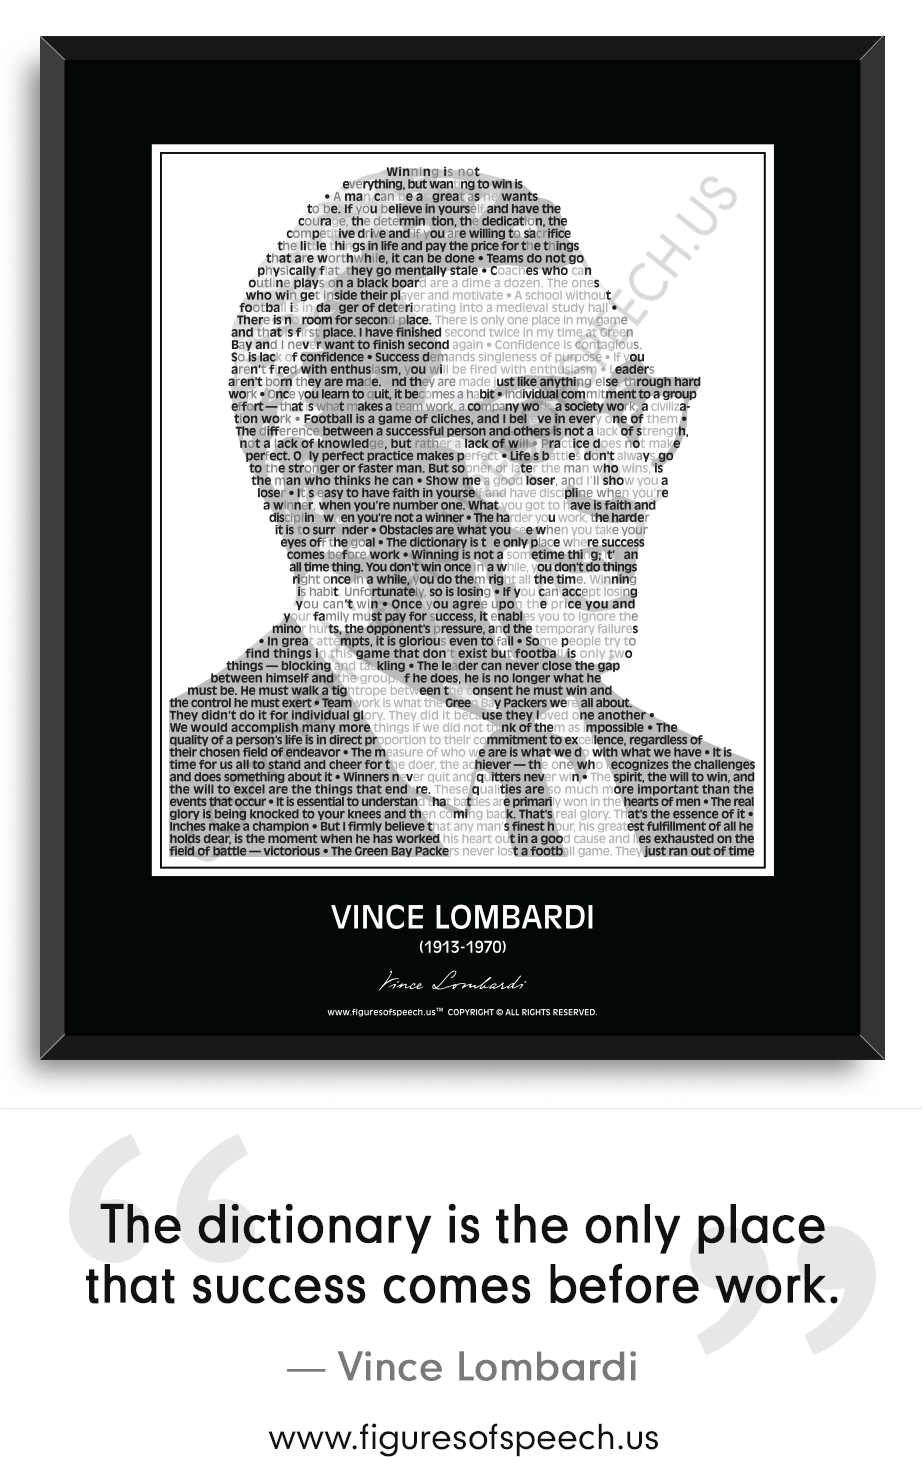 Vince Lombardi Photo Picture Poster or Framed Famous Quote "Dictionary Is.." 